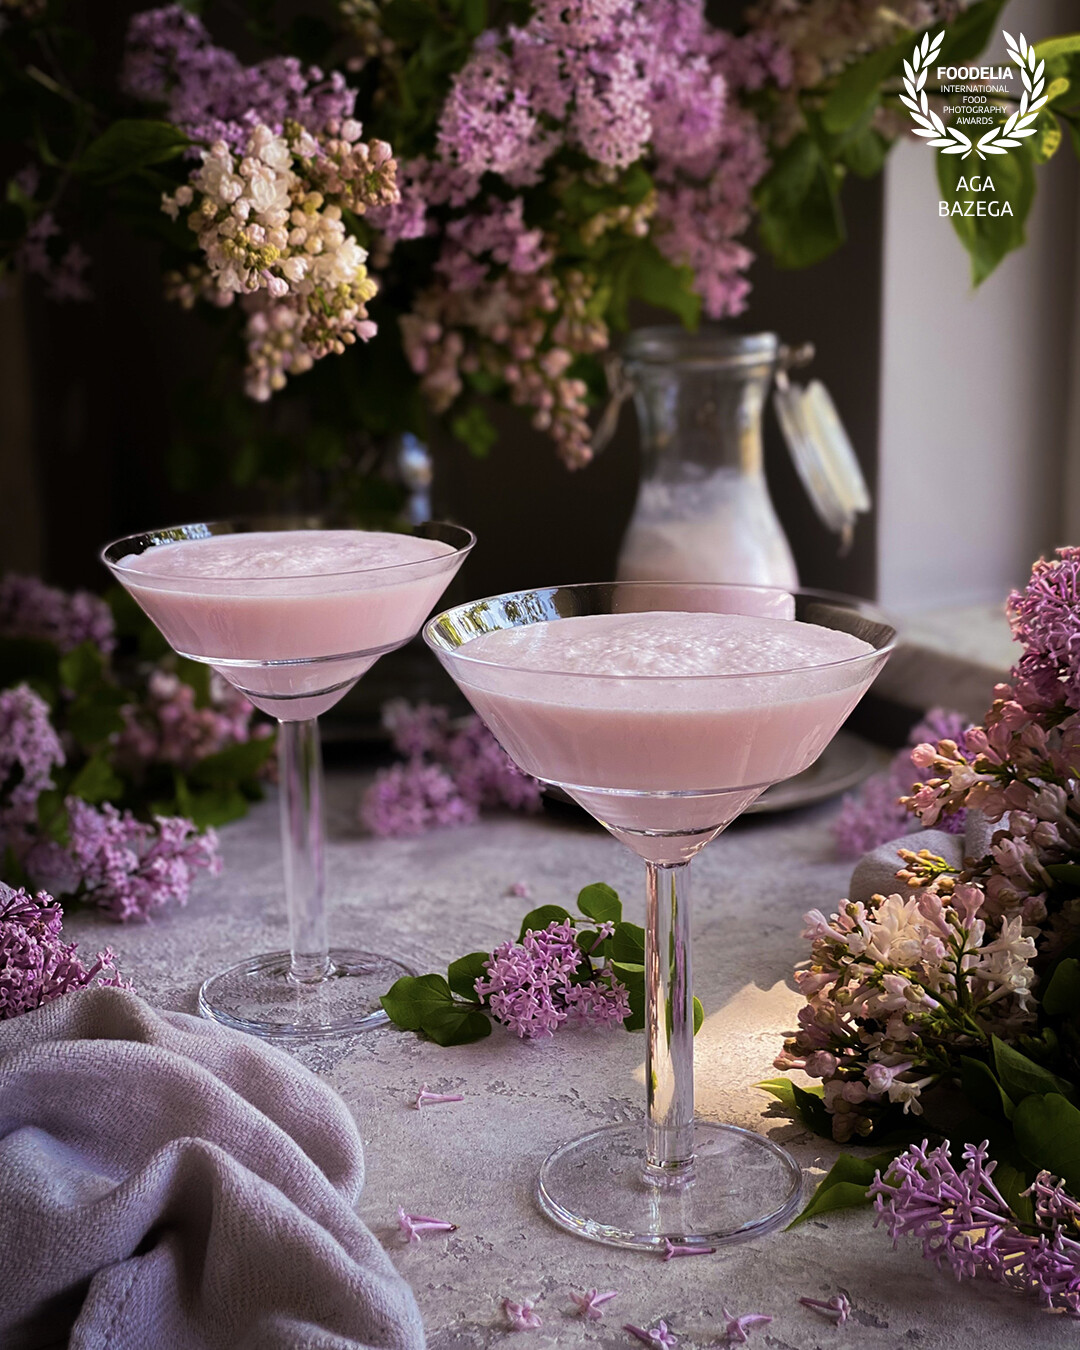 Lilac infused milk cocktail, image captured with a natural light.